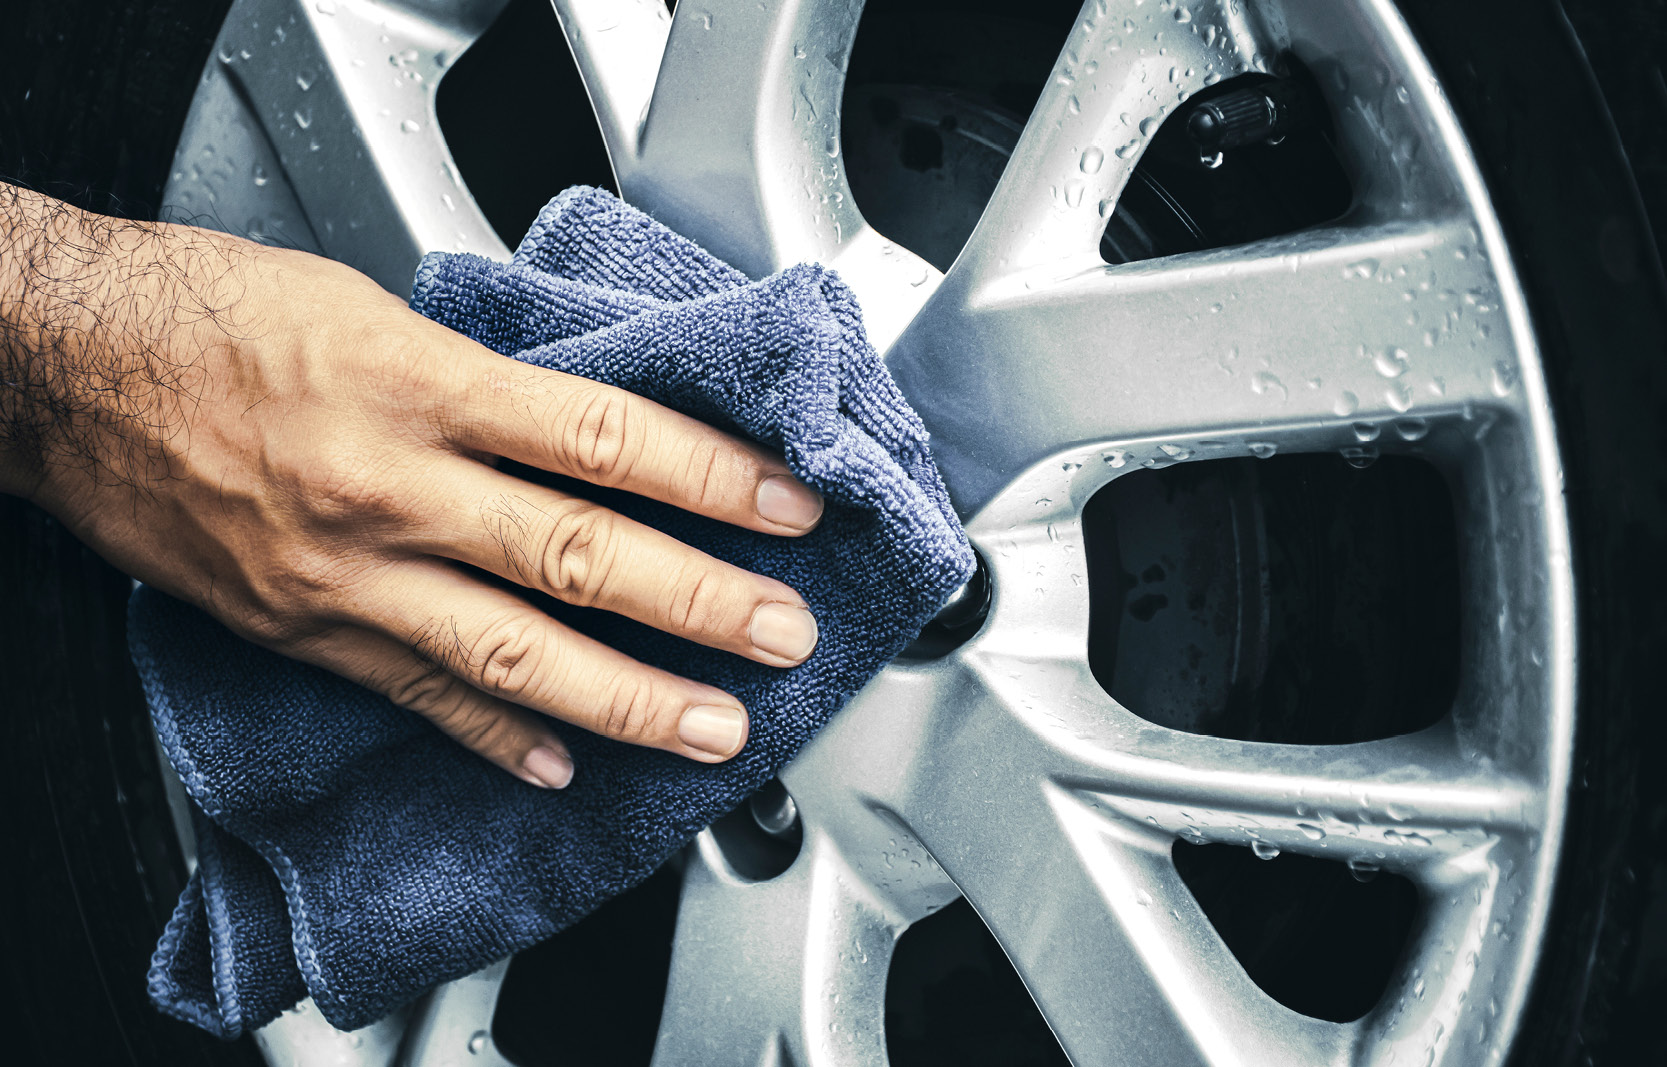 Wash your wheels